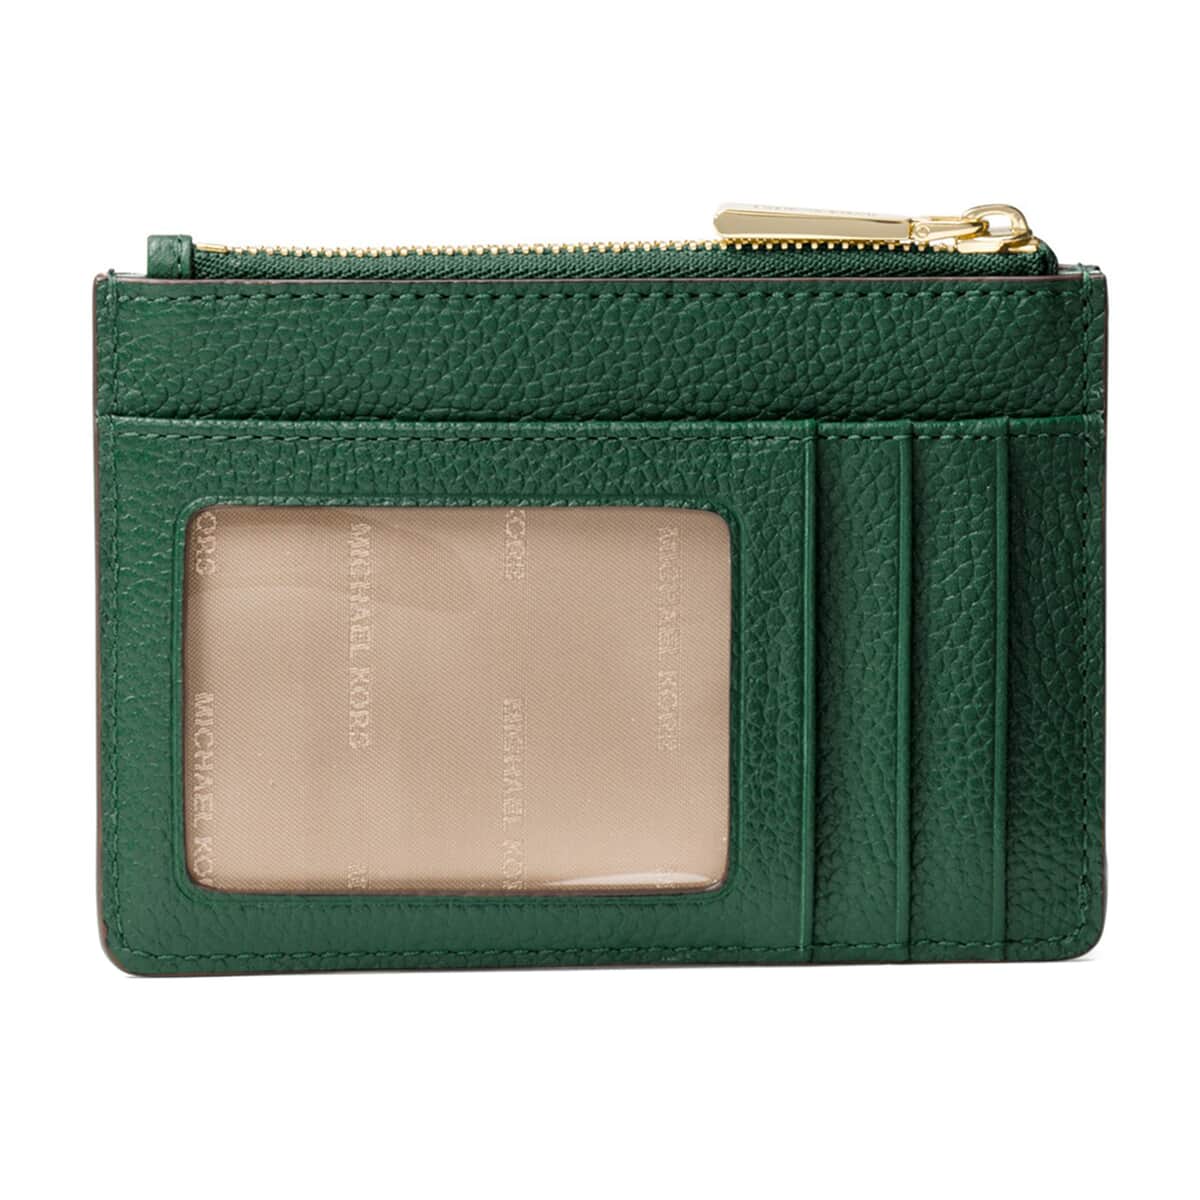 Michael Kors Green Pebbled Leather Jet Set Small Coin Purse (Ships in 8-10 Business Days)  image number 1